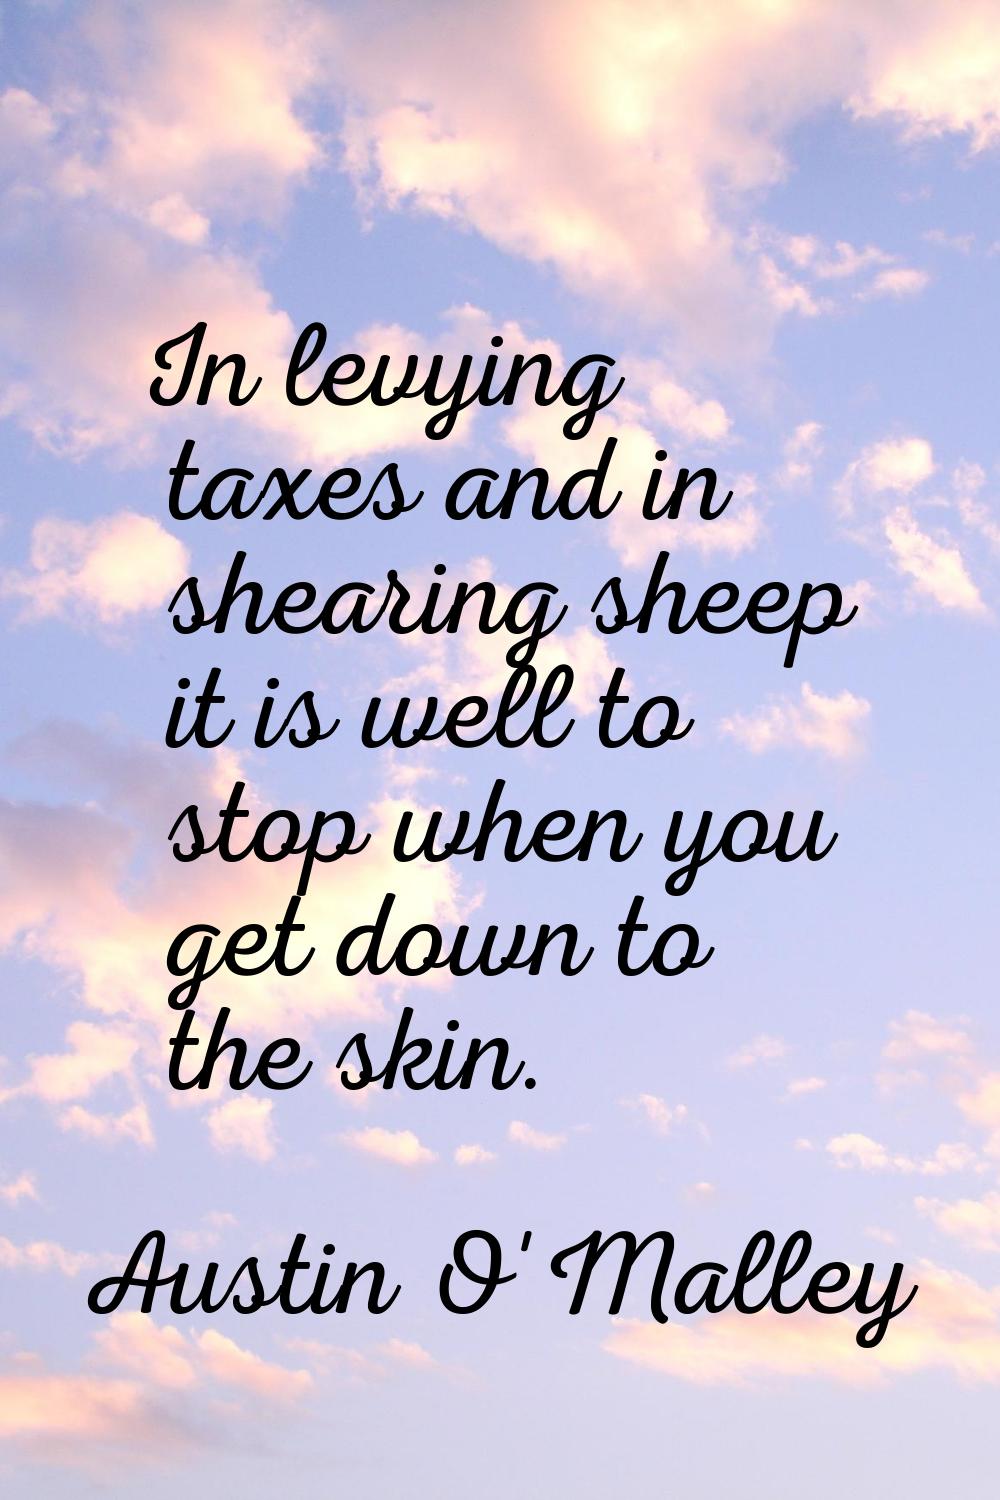 In levying taxes and in shearing sheep it is well to stop when you get down to the skin.